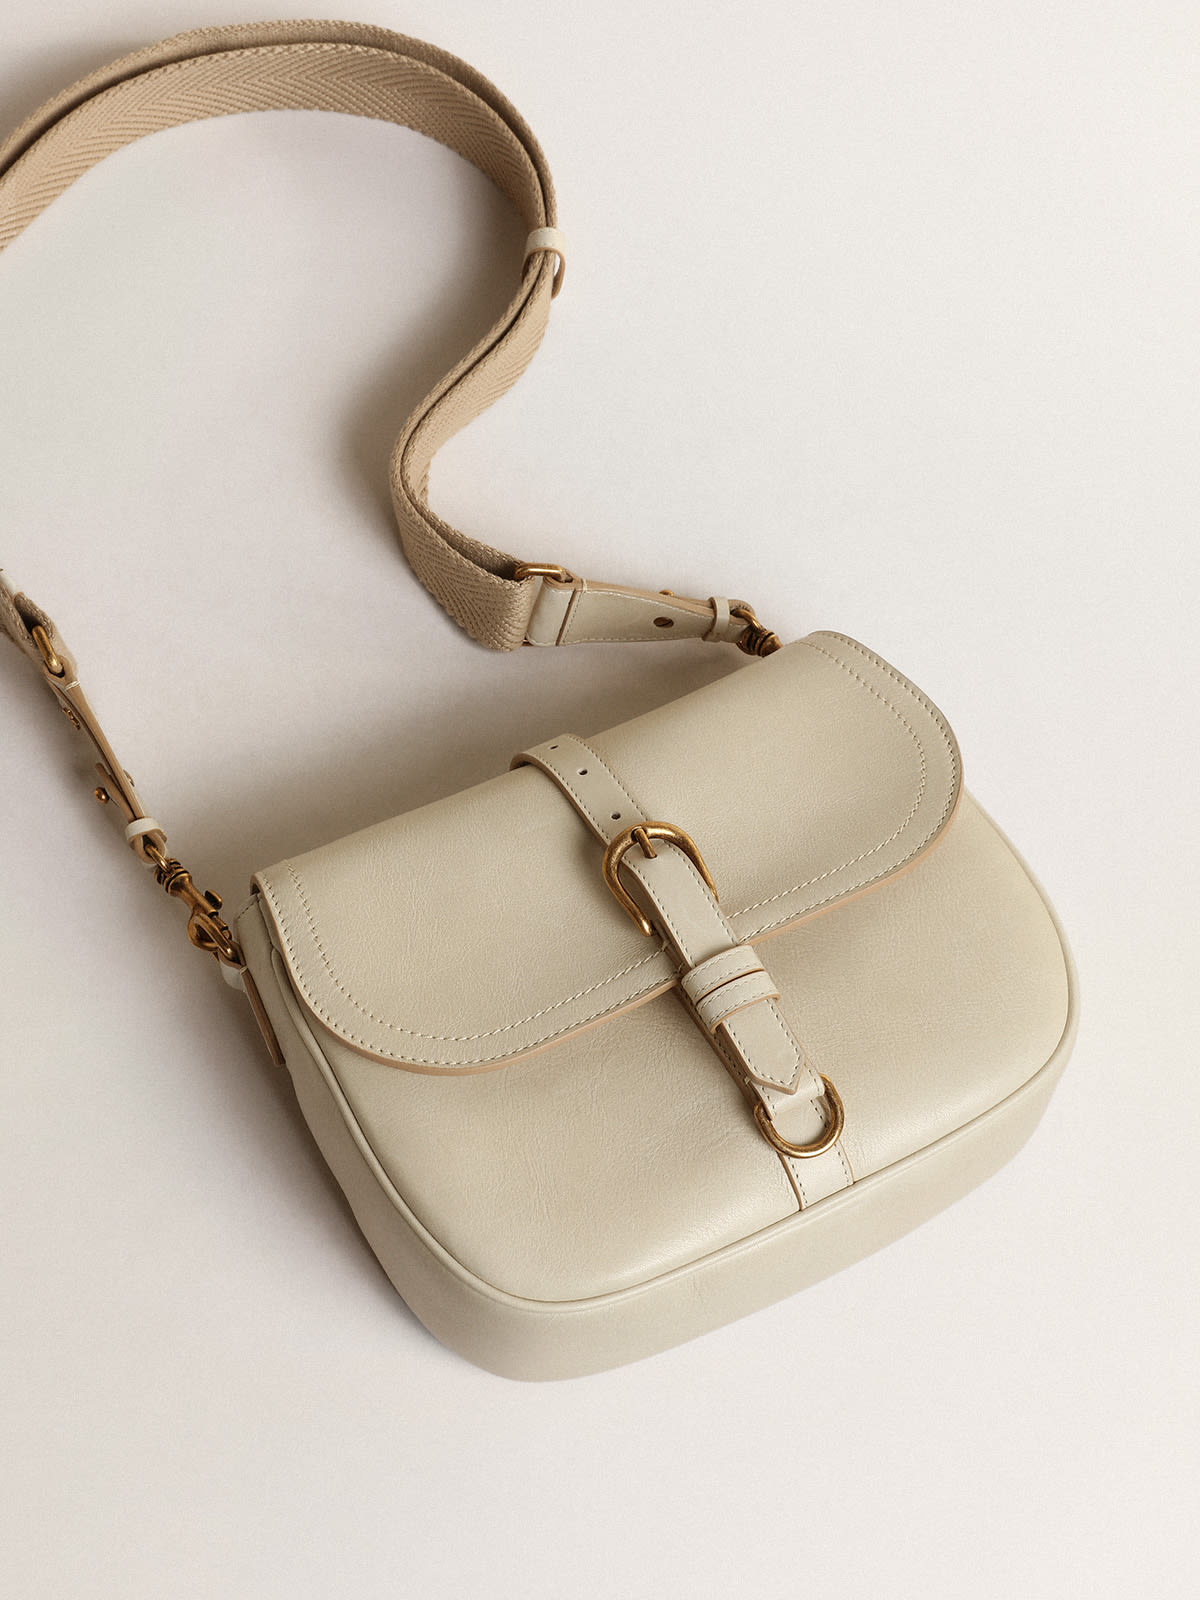 Golden Goose - Medium Sally Bag in porcelain leather with buckle and contrasting shoulder strap in 